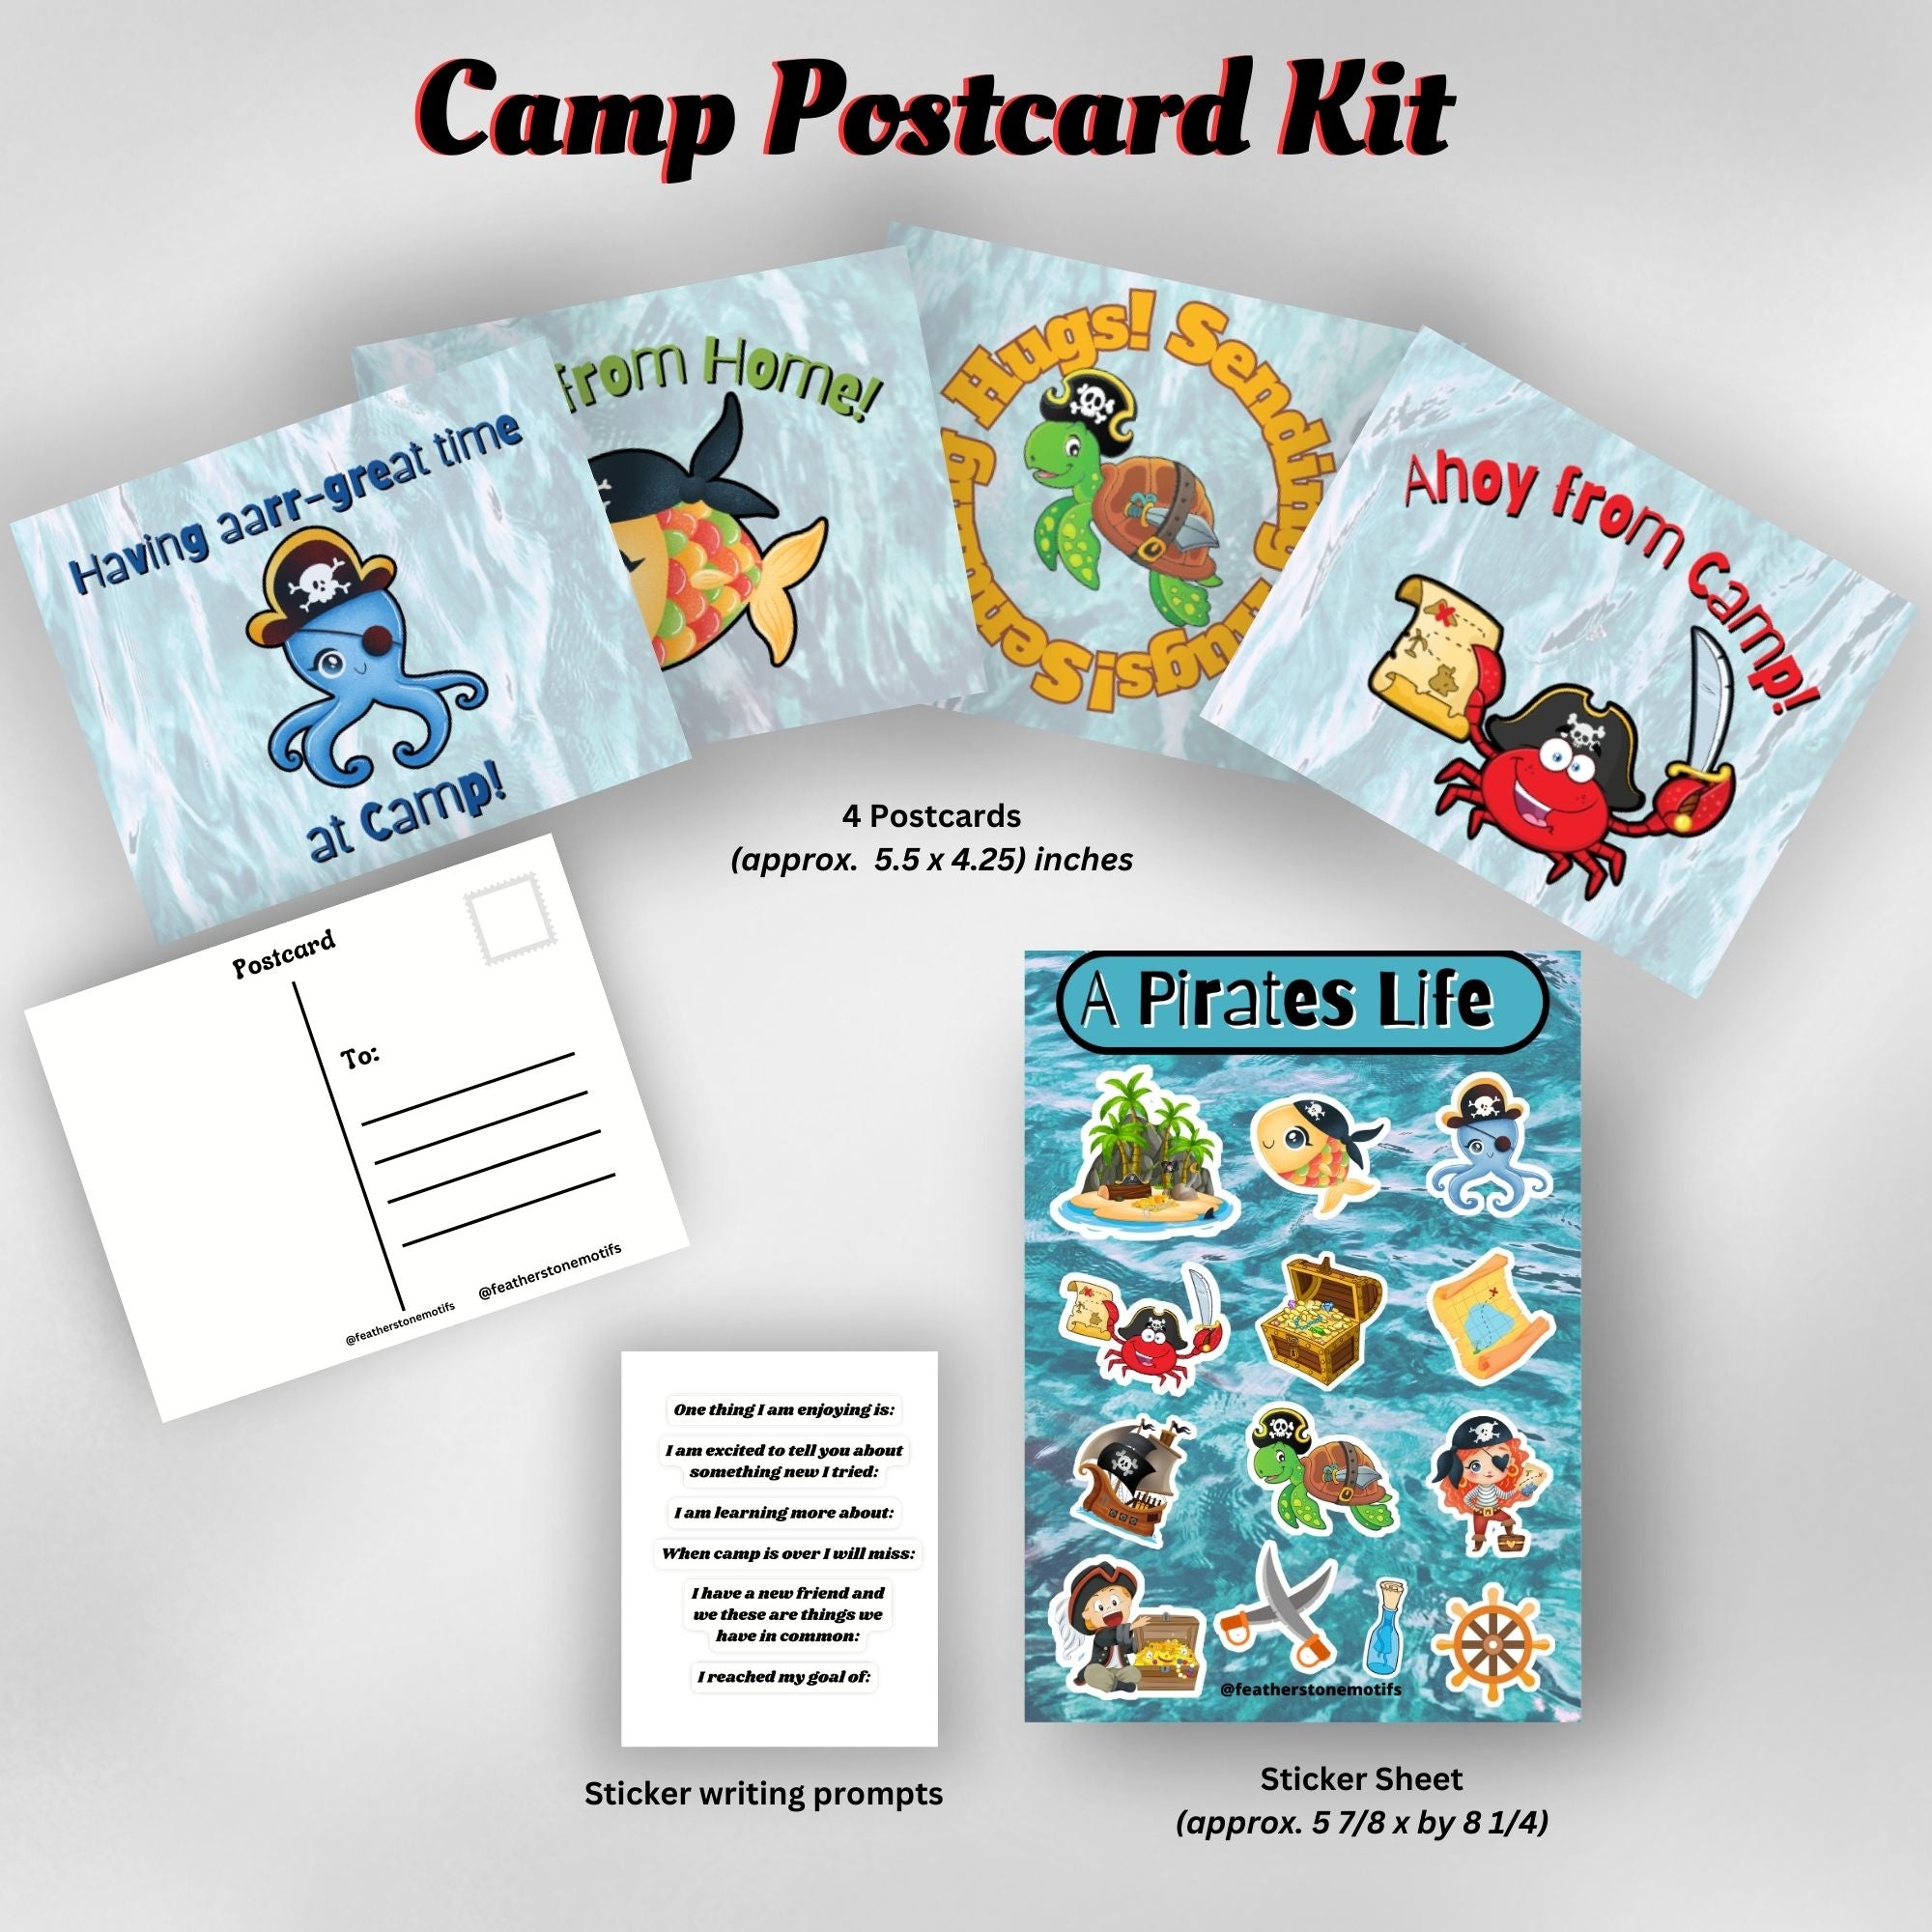 This image shows the Pirate themed Camp Postcard Kit with dimensions and descriptions for each item.